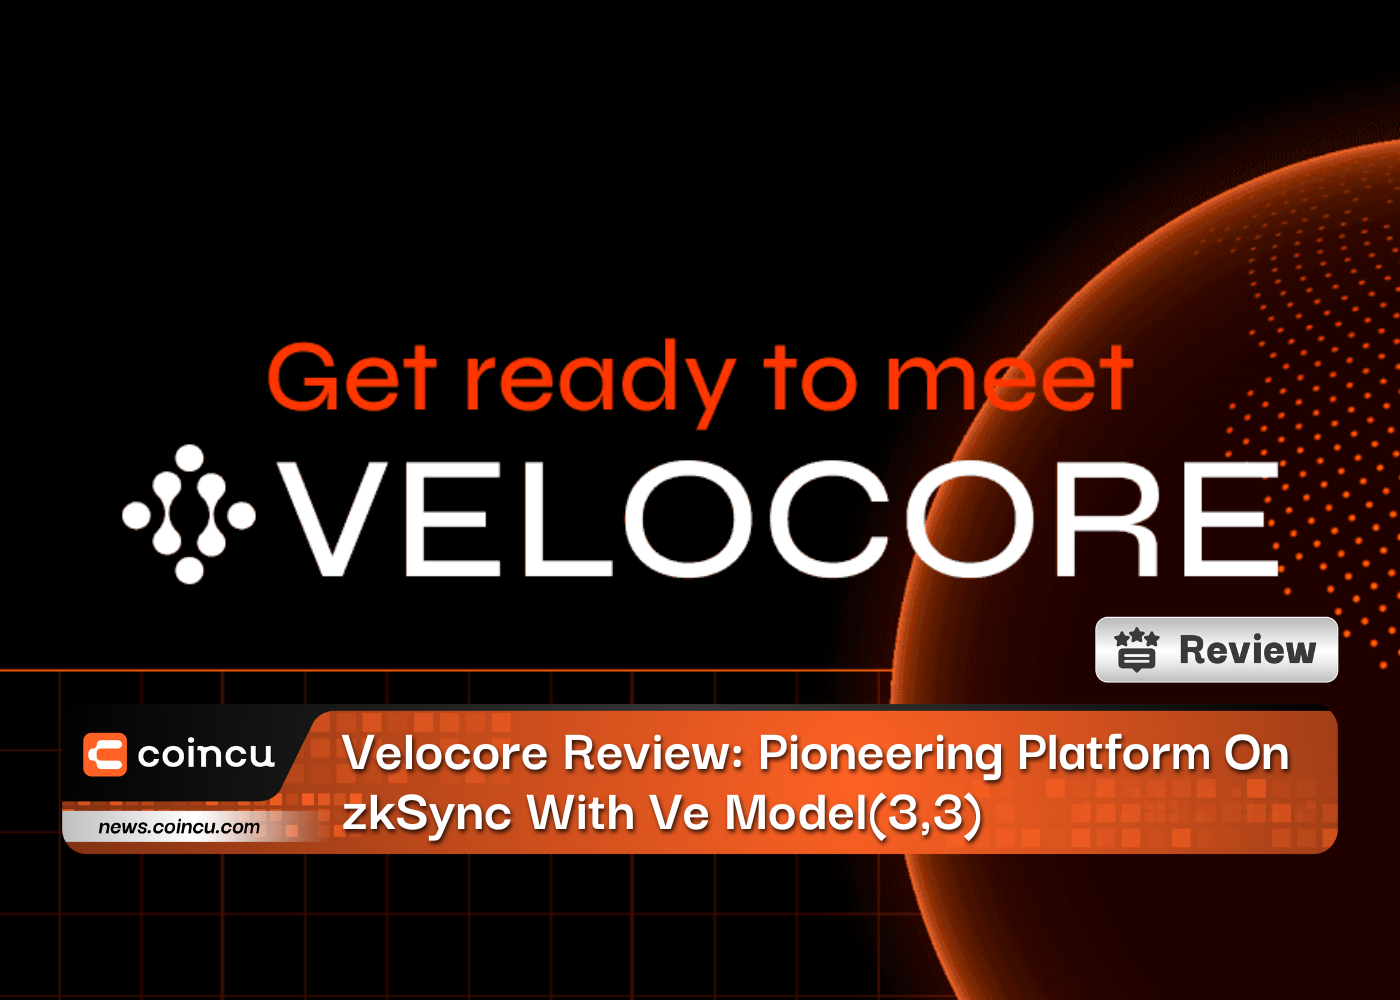 Velocore Review: Pioneering Platform On zkSync With Ve Model(3,3)